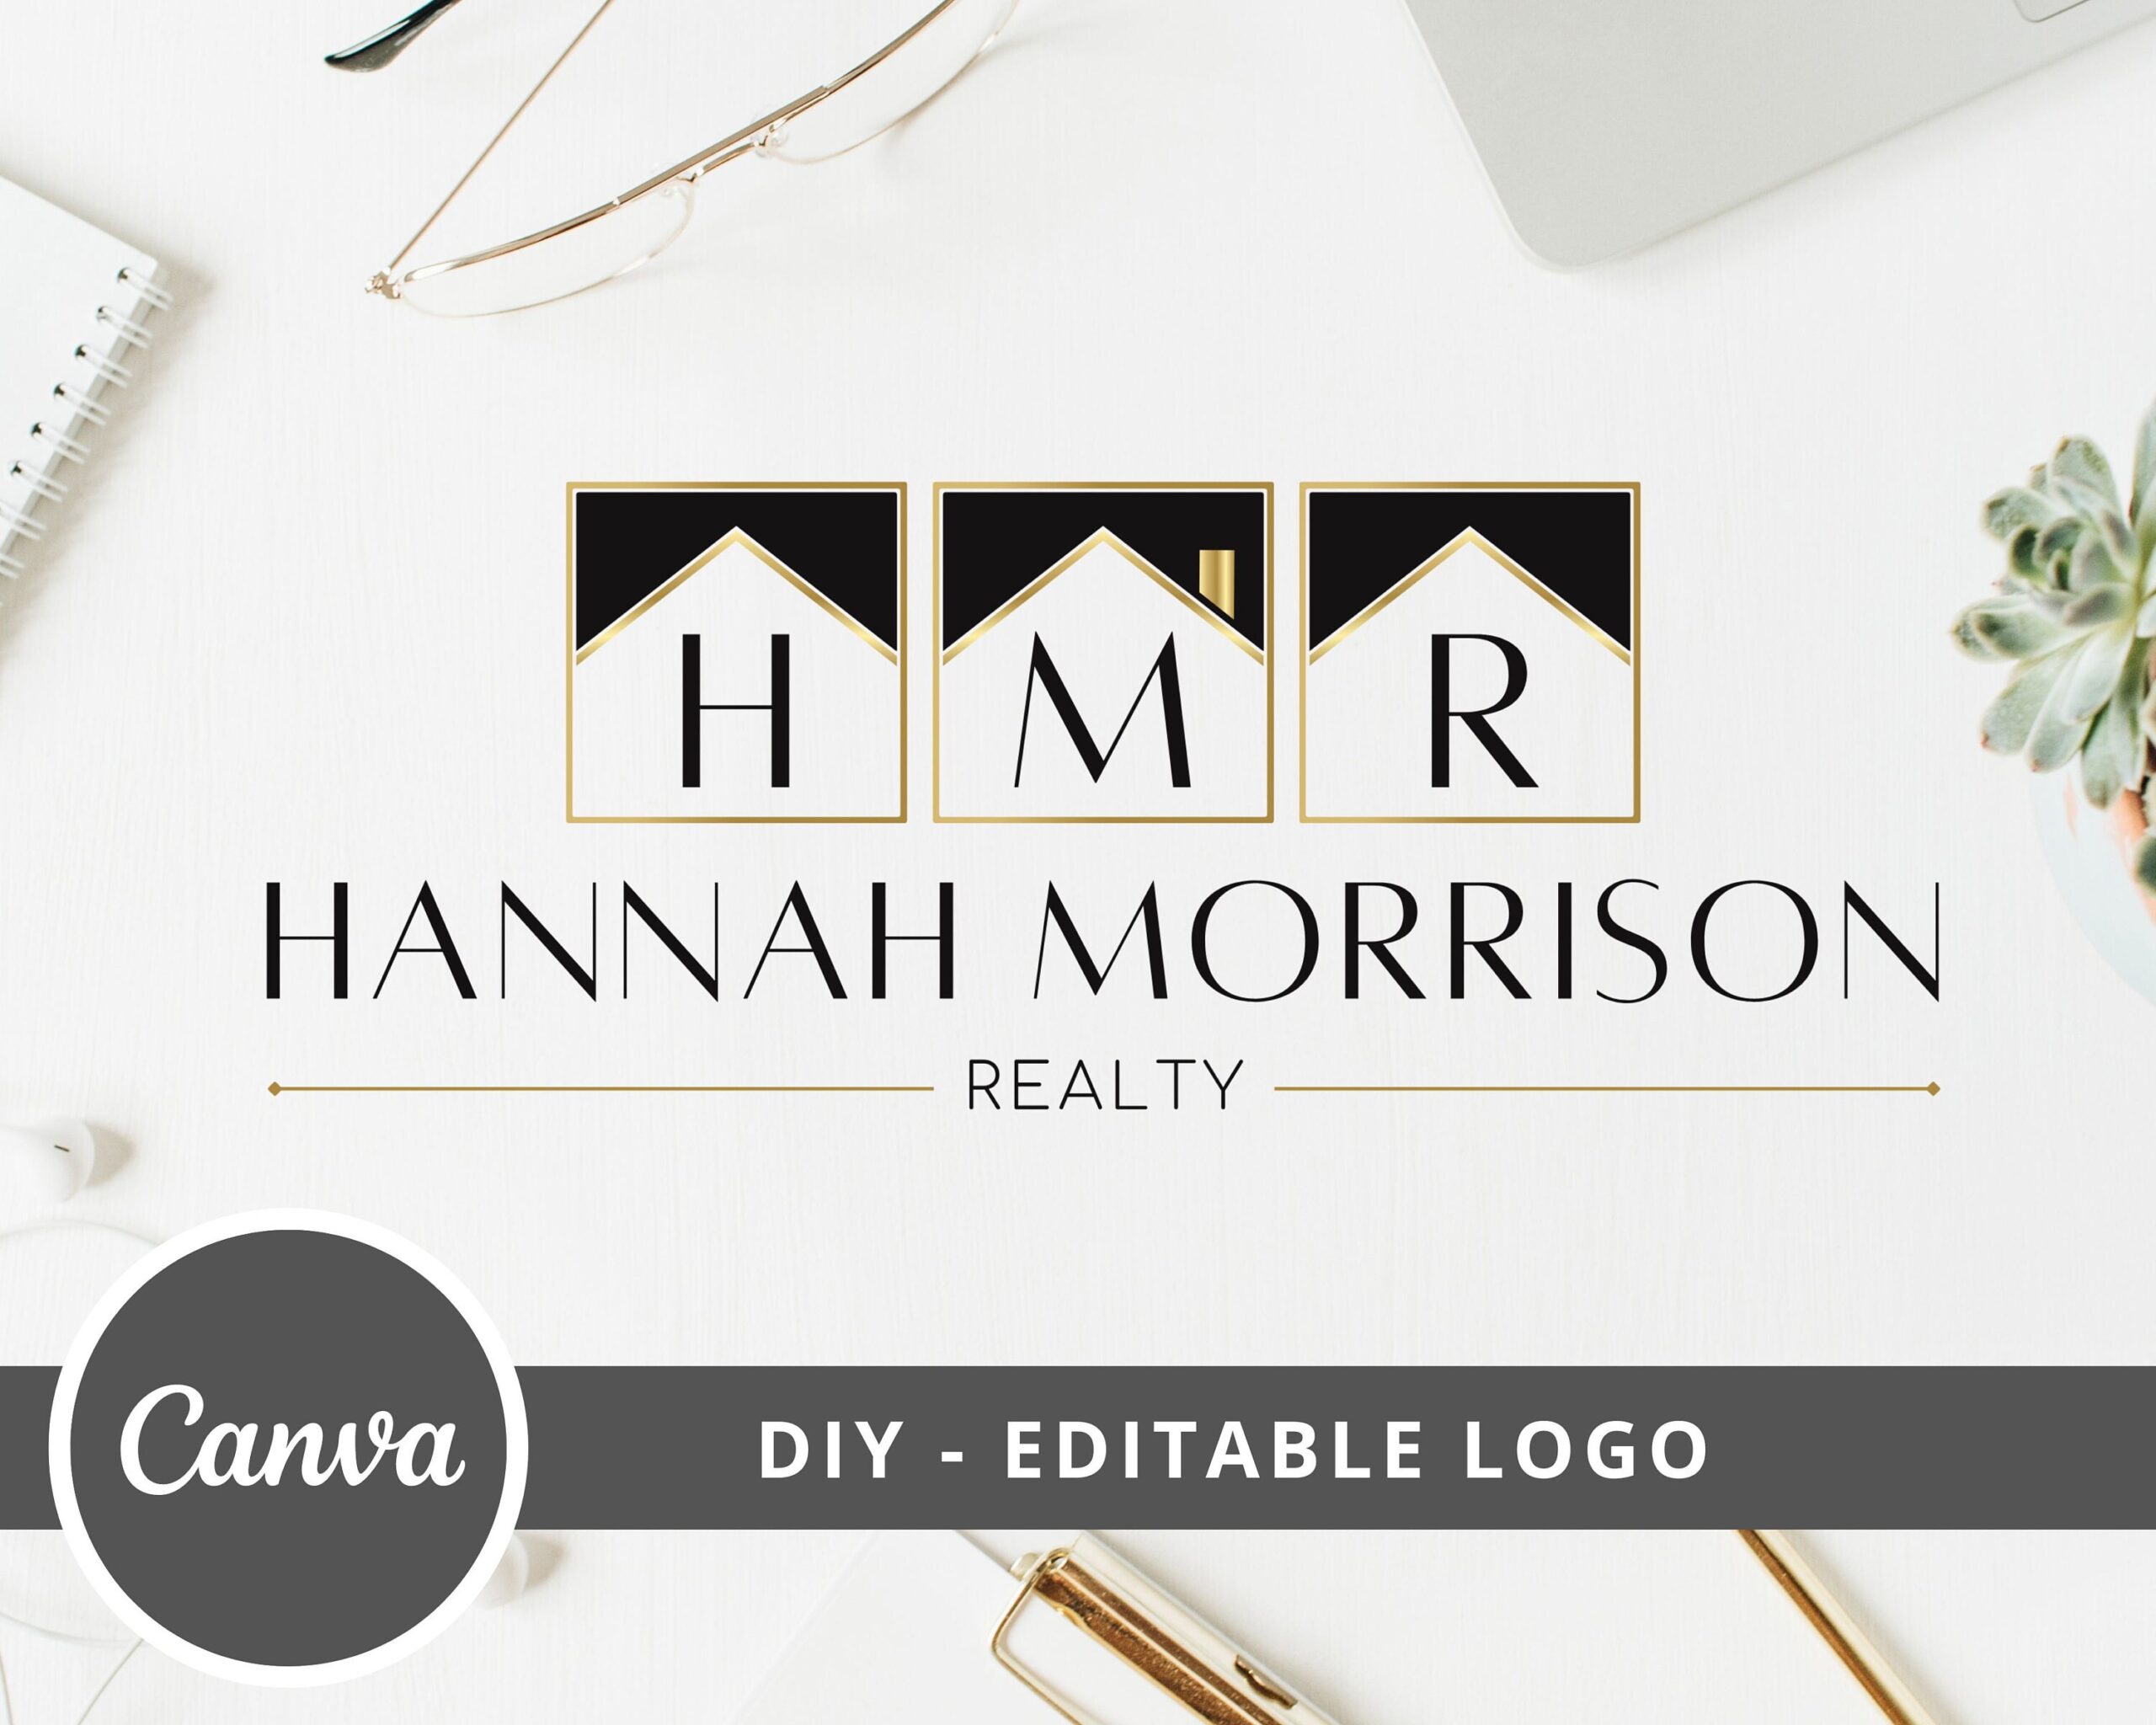 DIY Logo Design for Real Estate Agents, Fully Editable Logo made in Canva. Realtor Logo Template, House Logo, Edit Download, Instant Access!